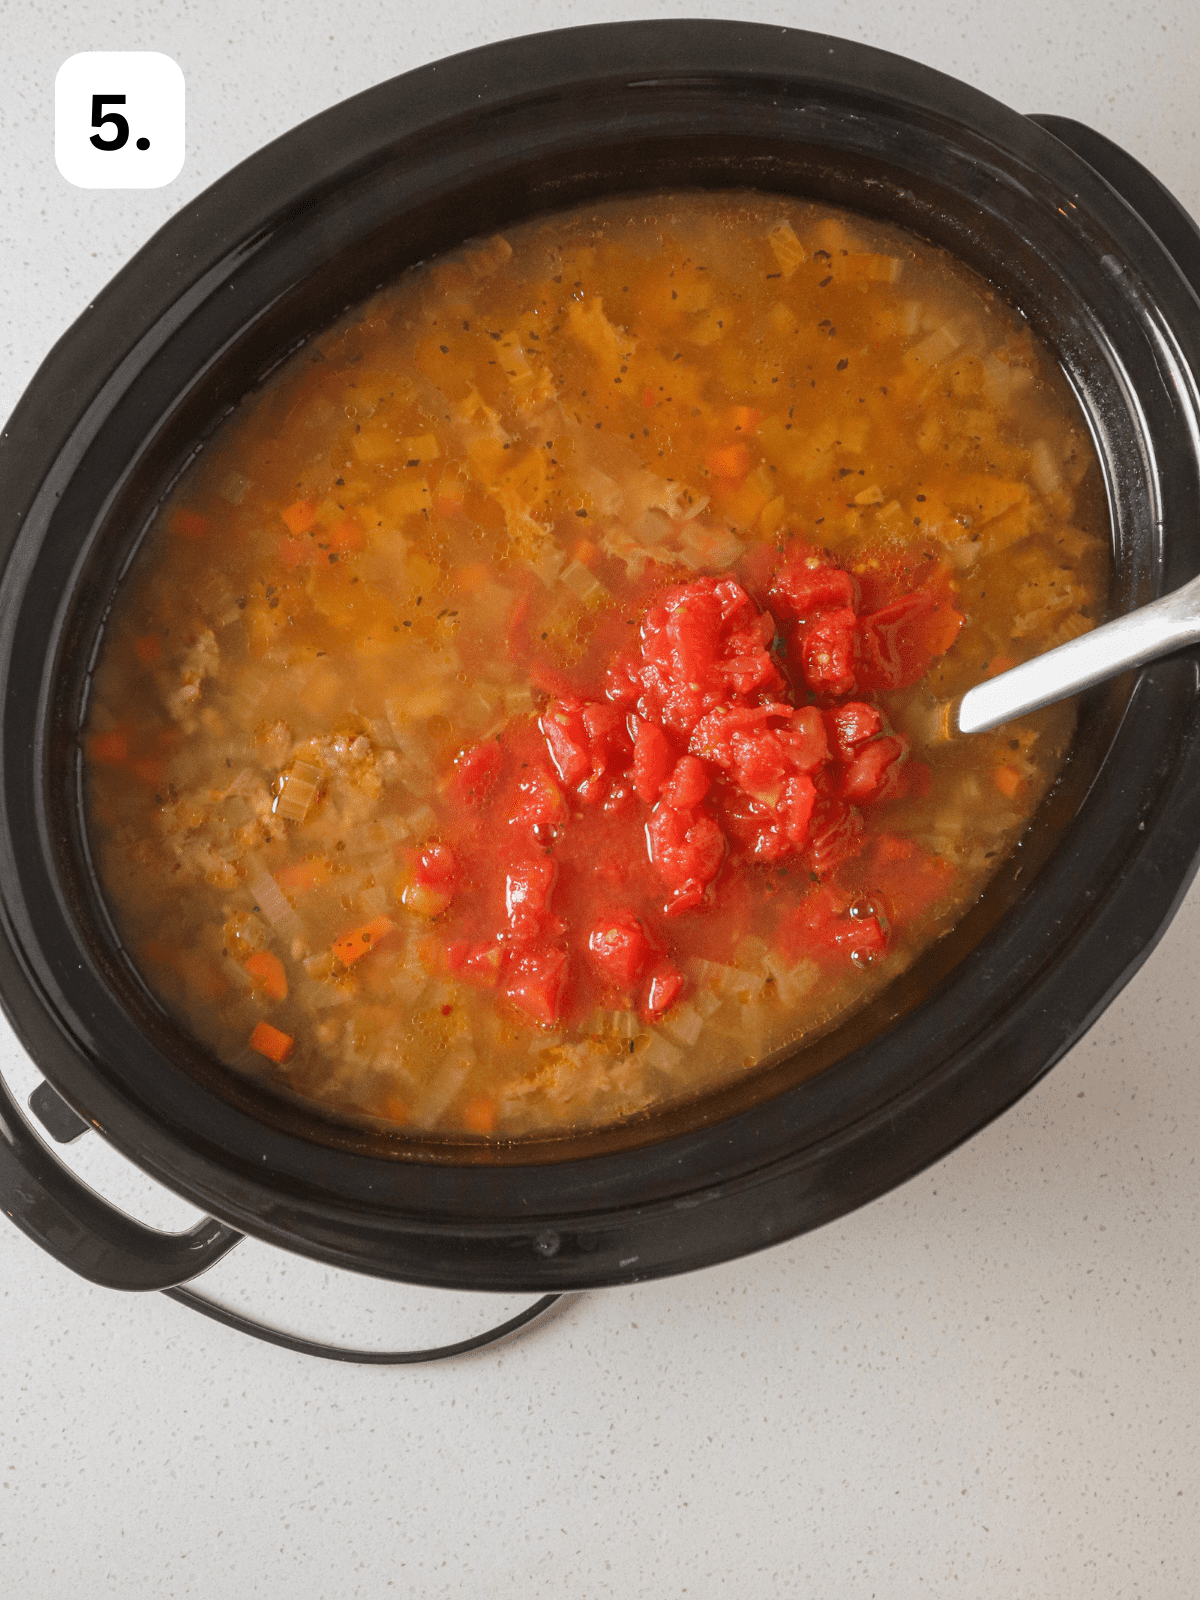 Diced tomatoes stirred in slow cooker